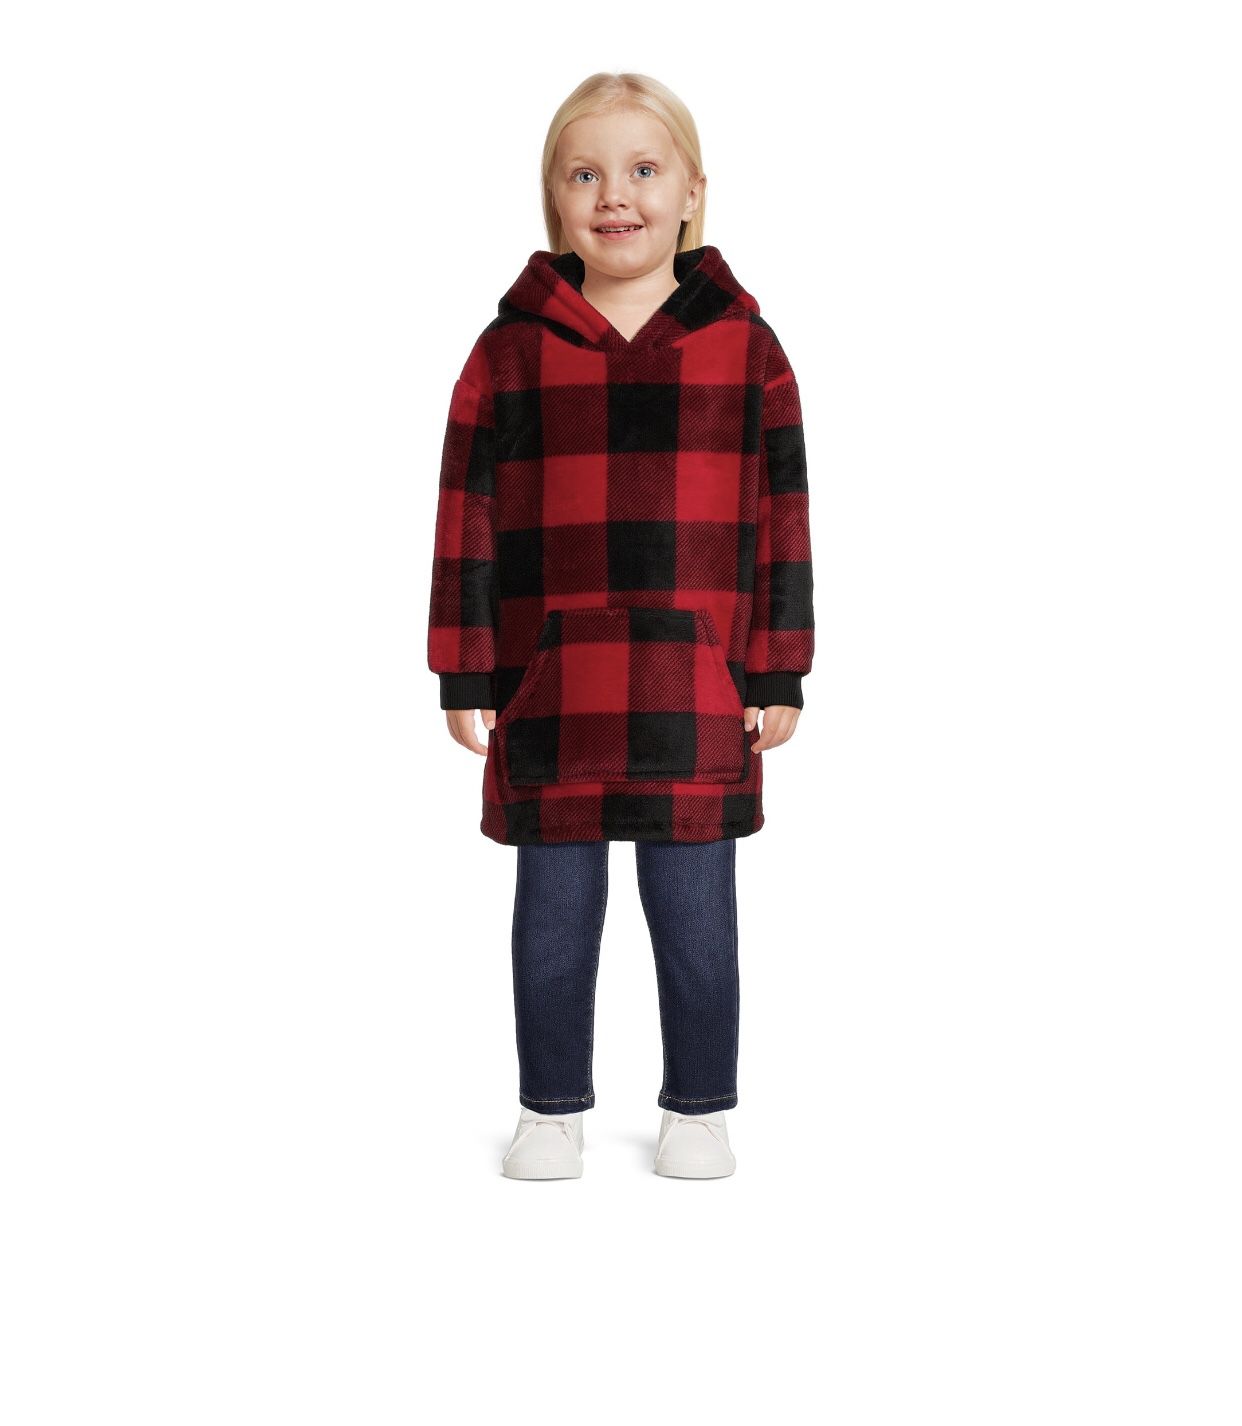 Toddler Unisex Faux Sherpa Hoodie, Size 2T